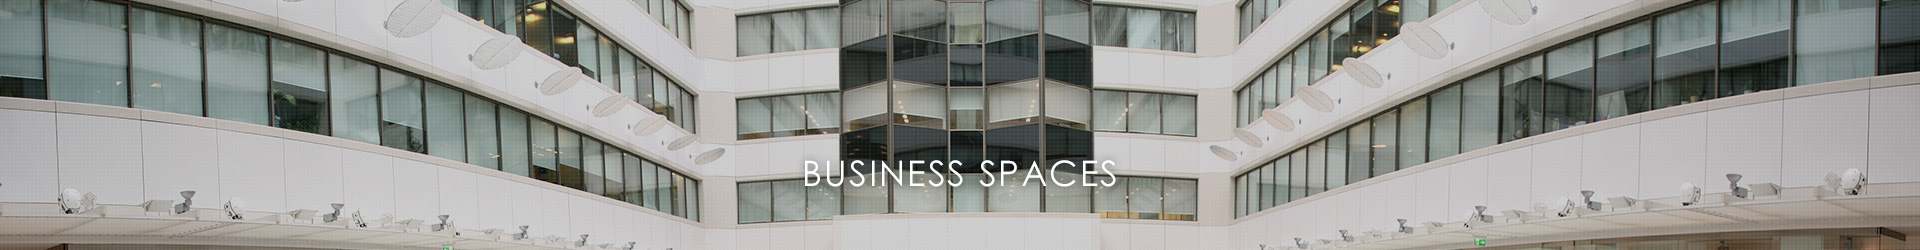 BUSINESS SPACES